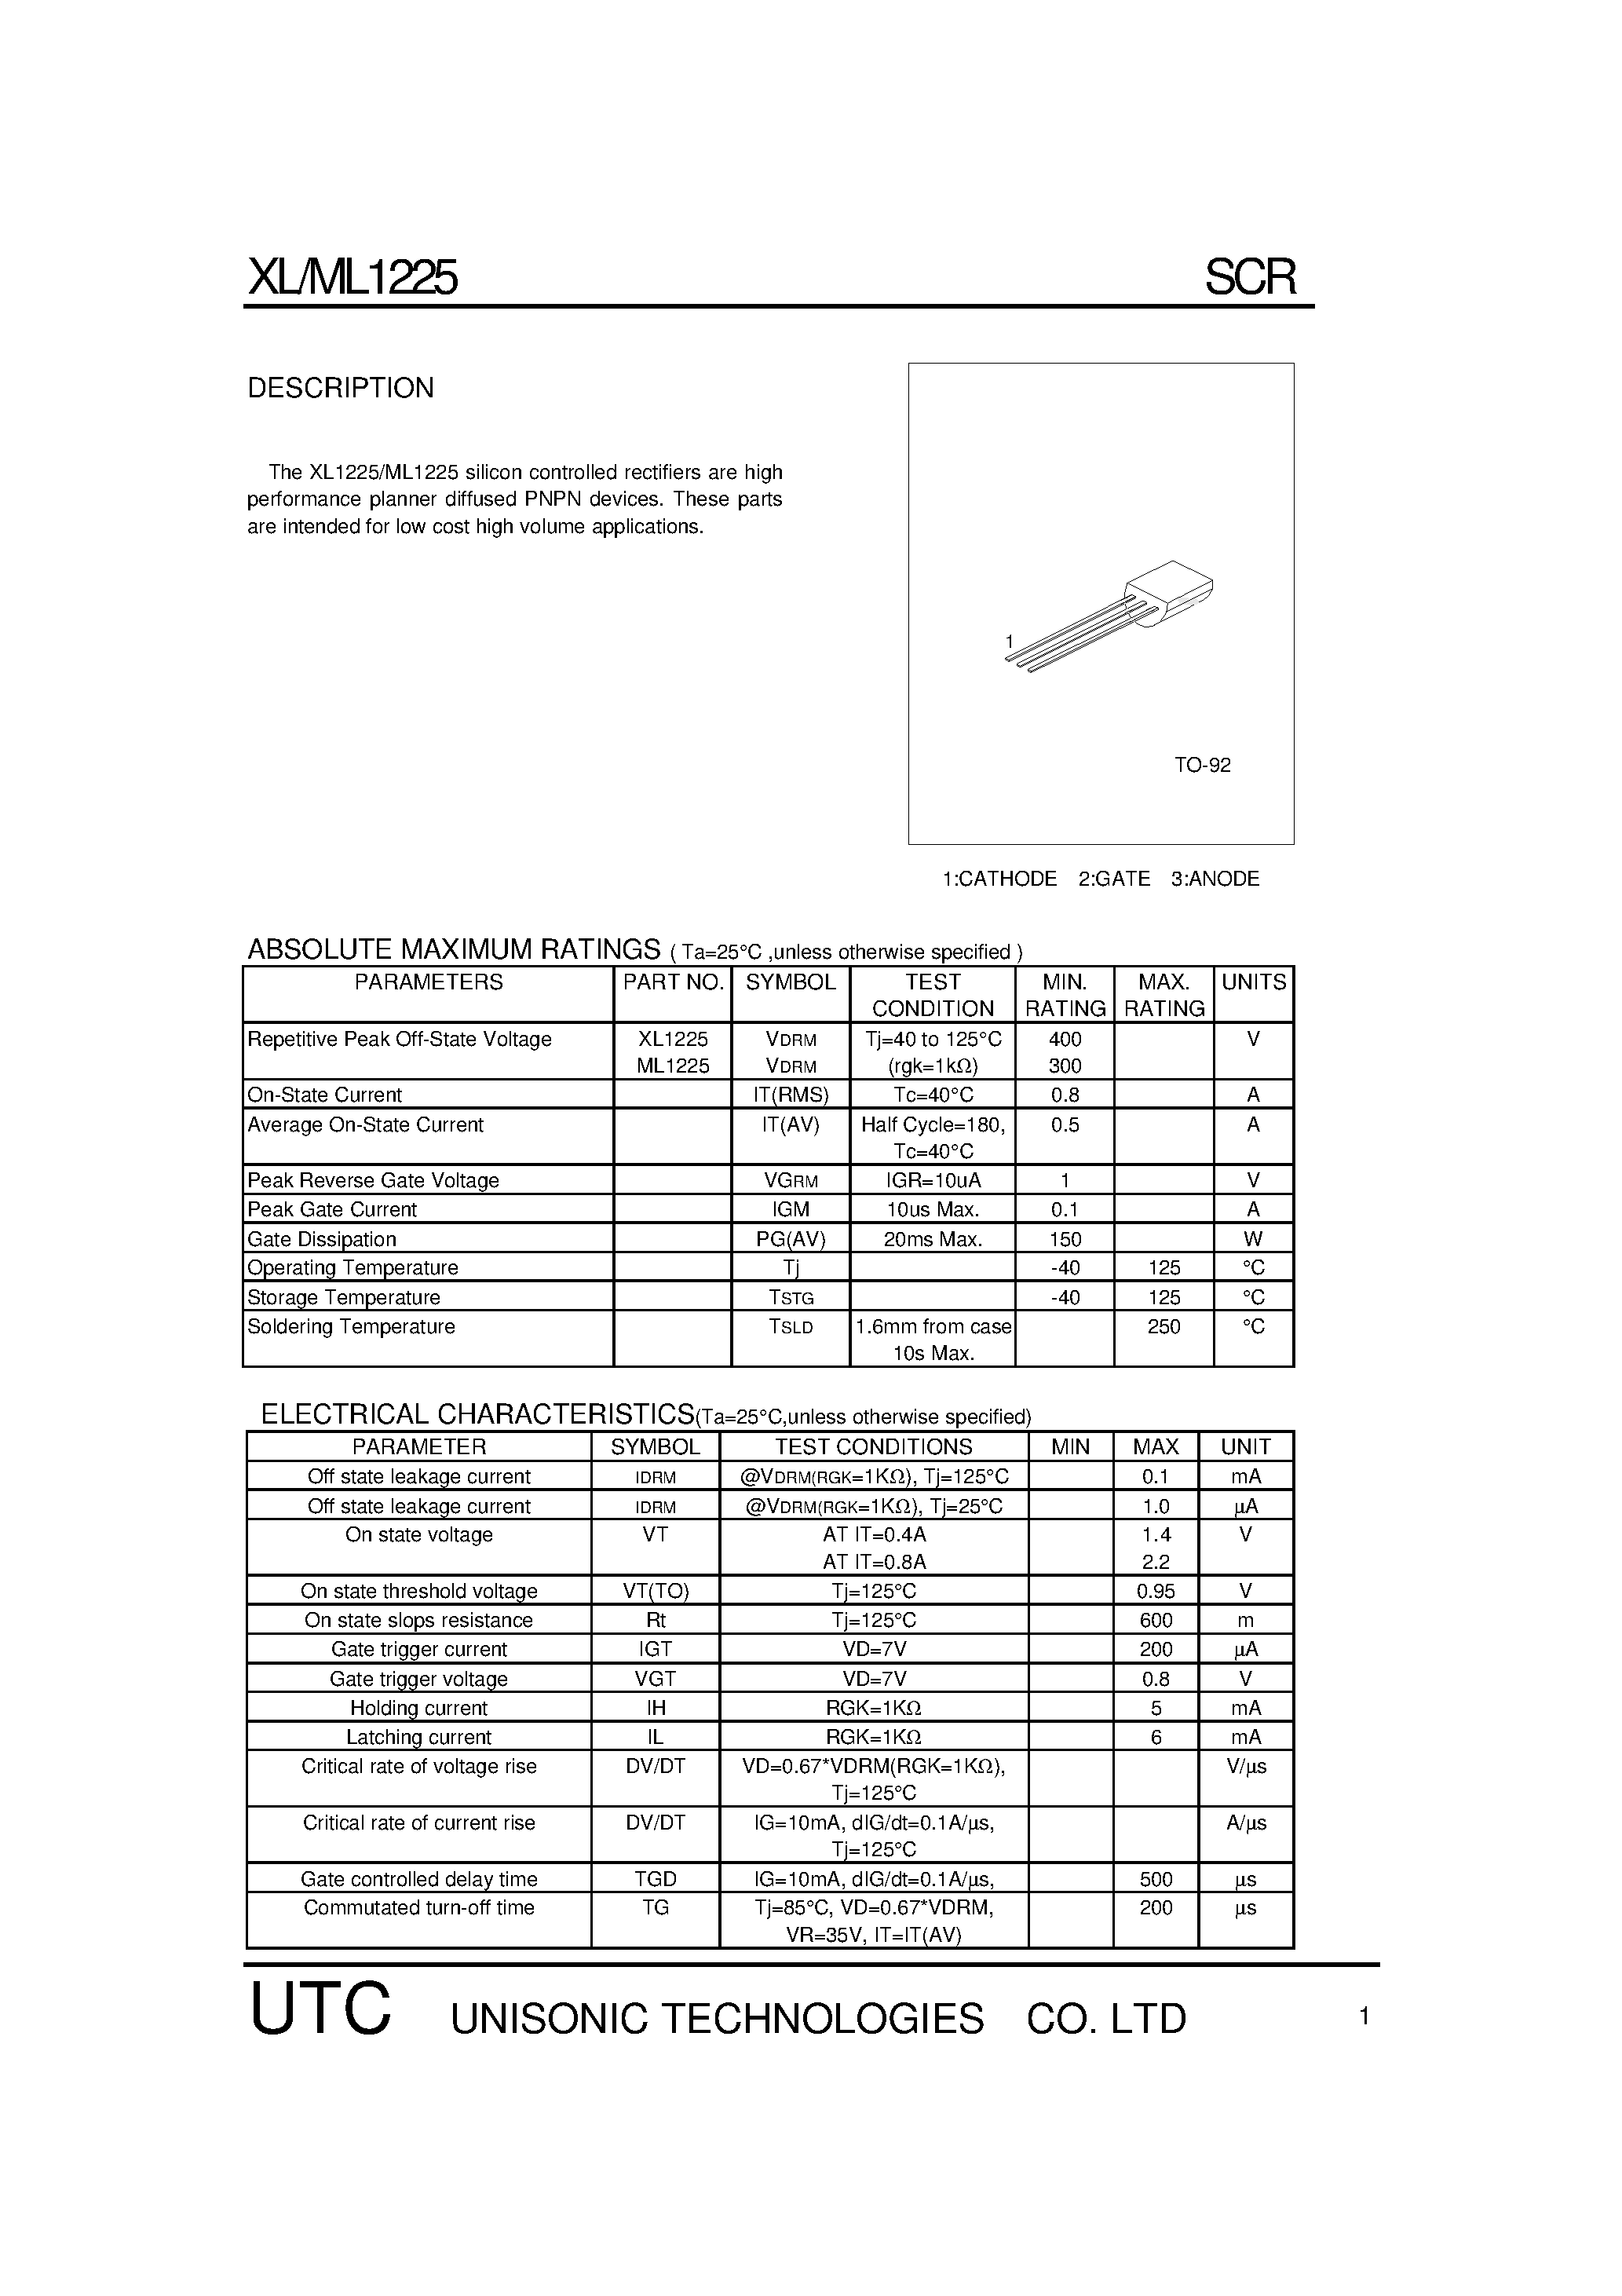 Datasheet UTCML1225 - The XL1225/ML1225 silicon controlled rectifiers page 1